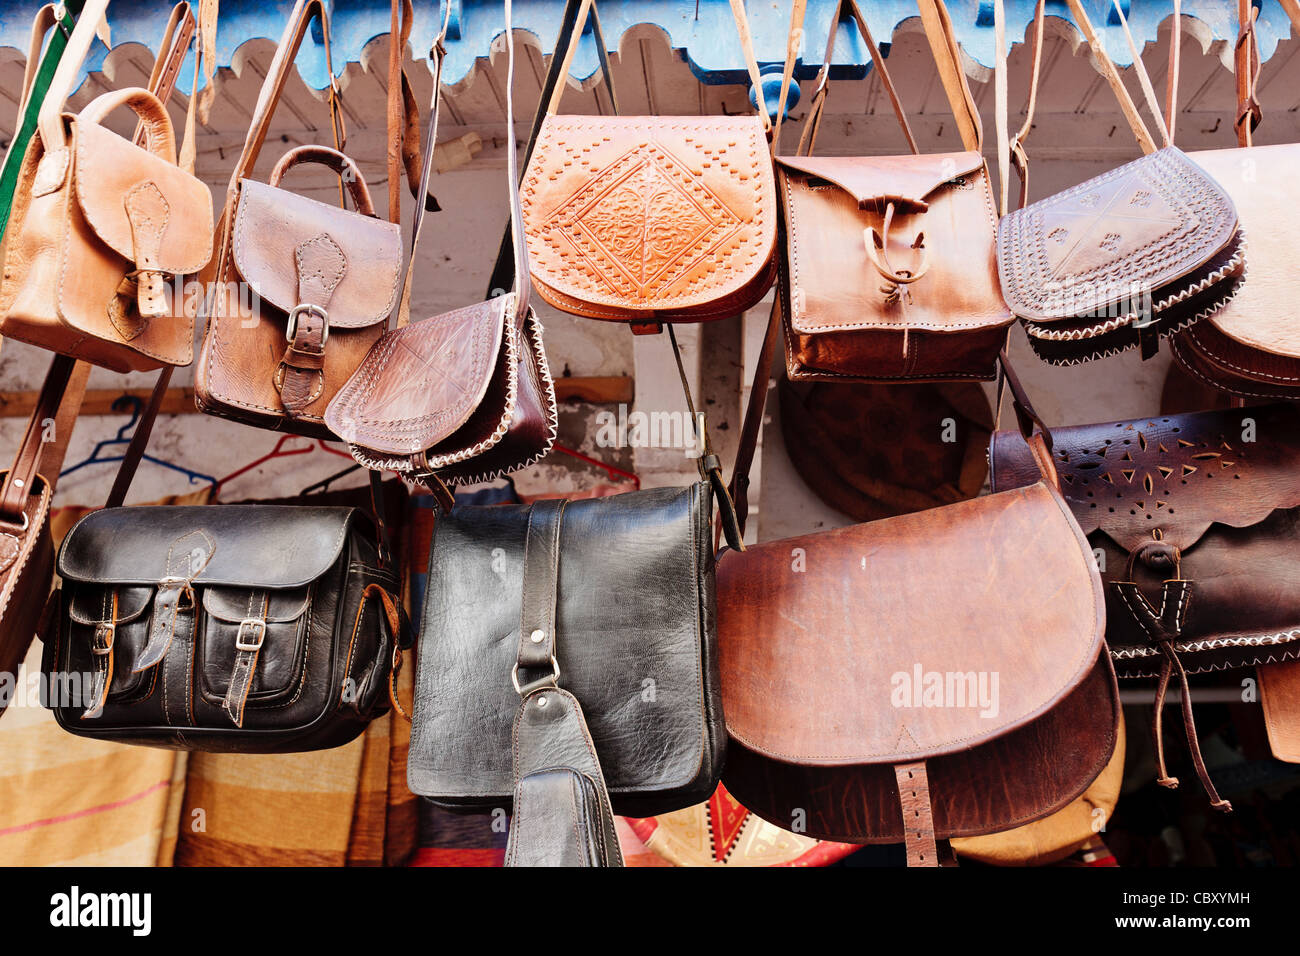 Leather Bags Marrakech High Resolution Stock Photography and Images - Alamy